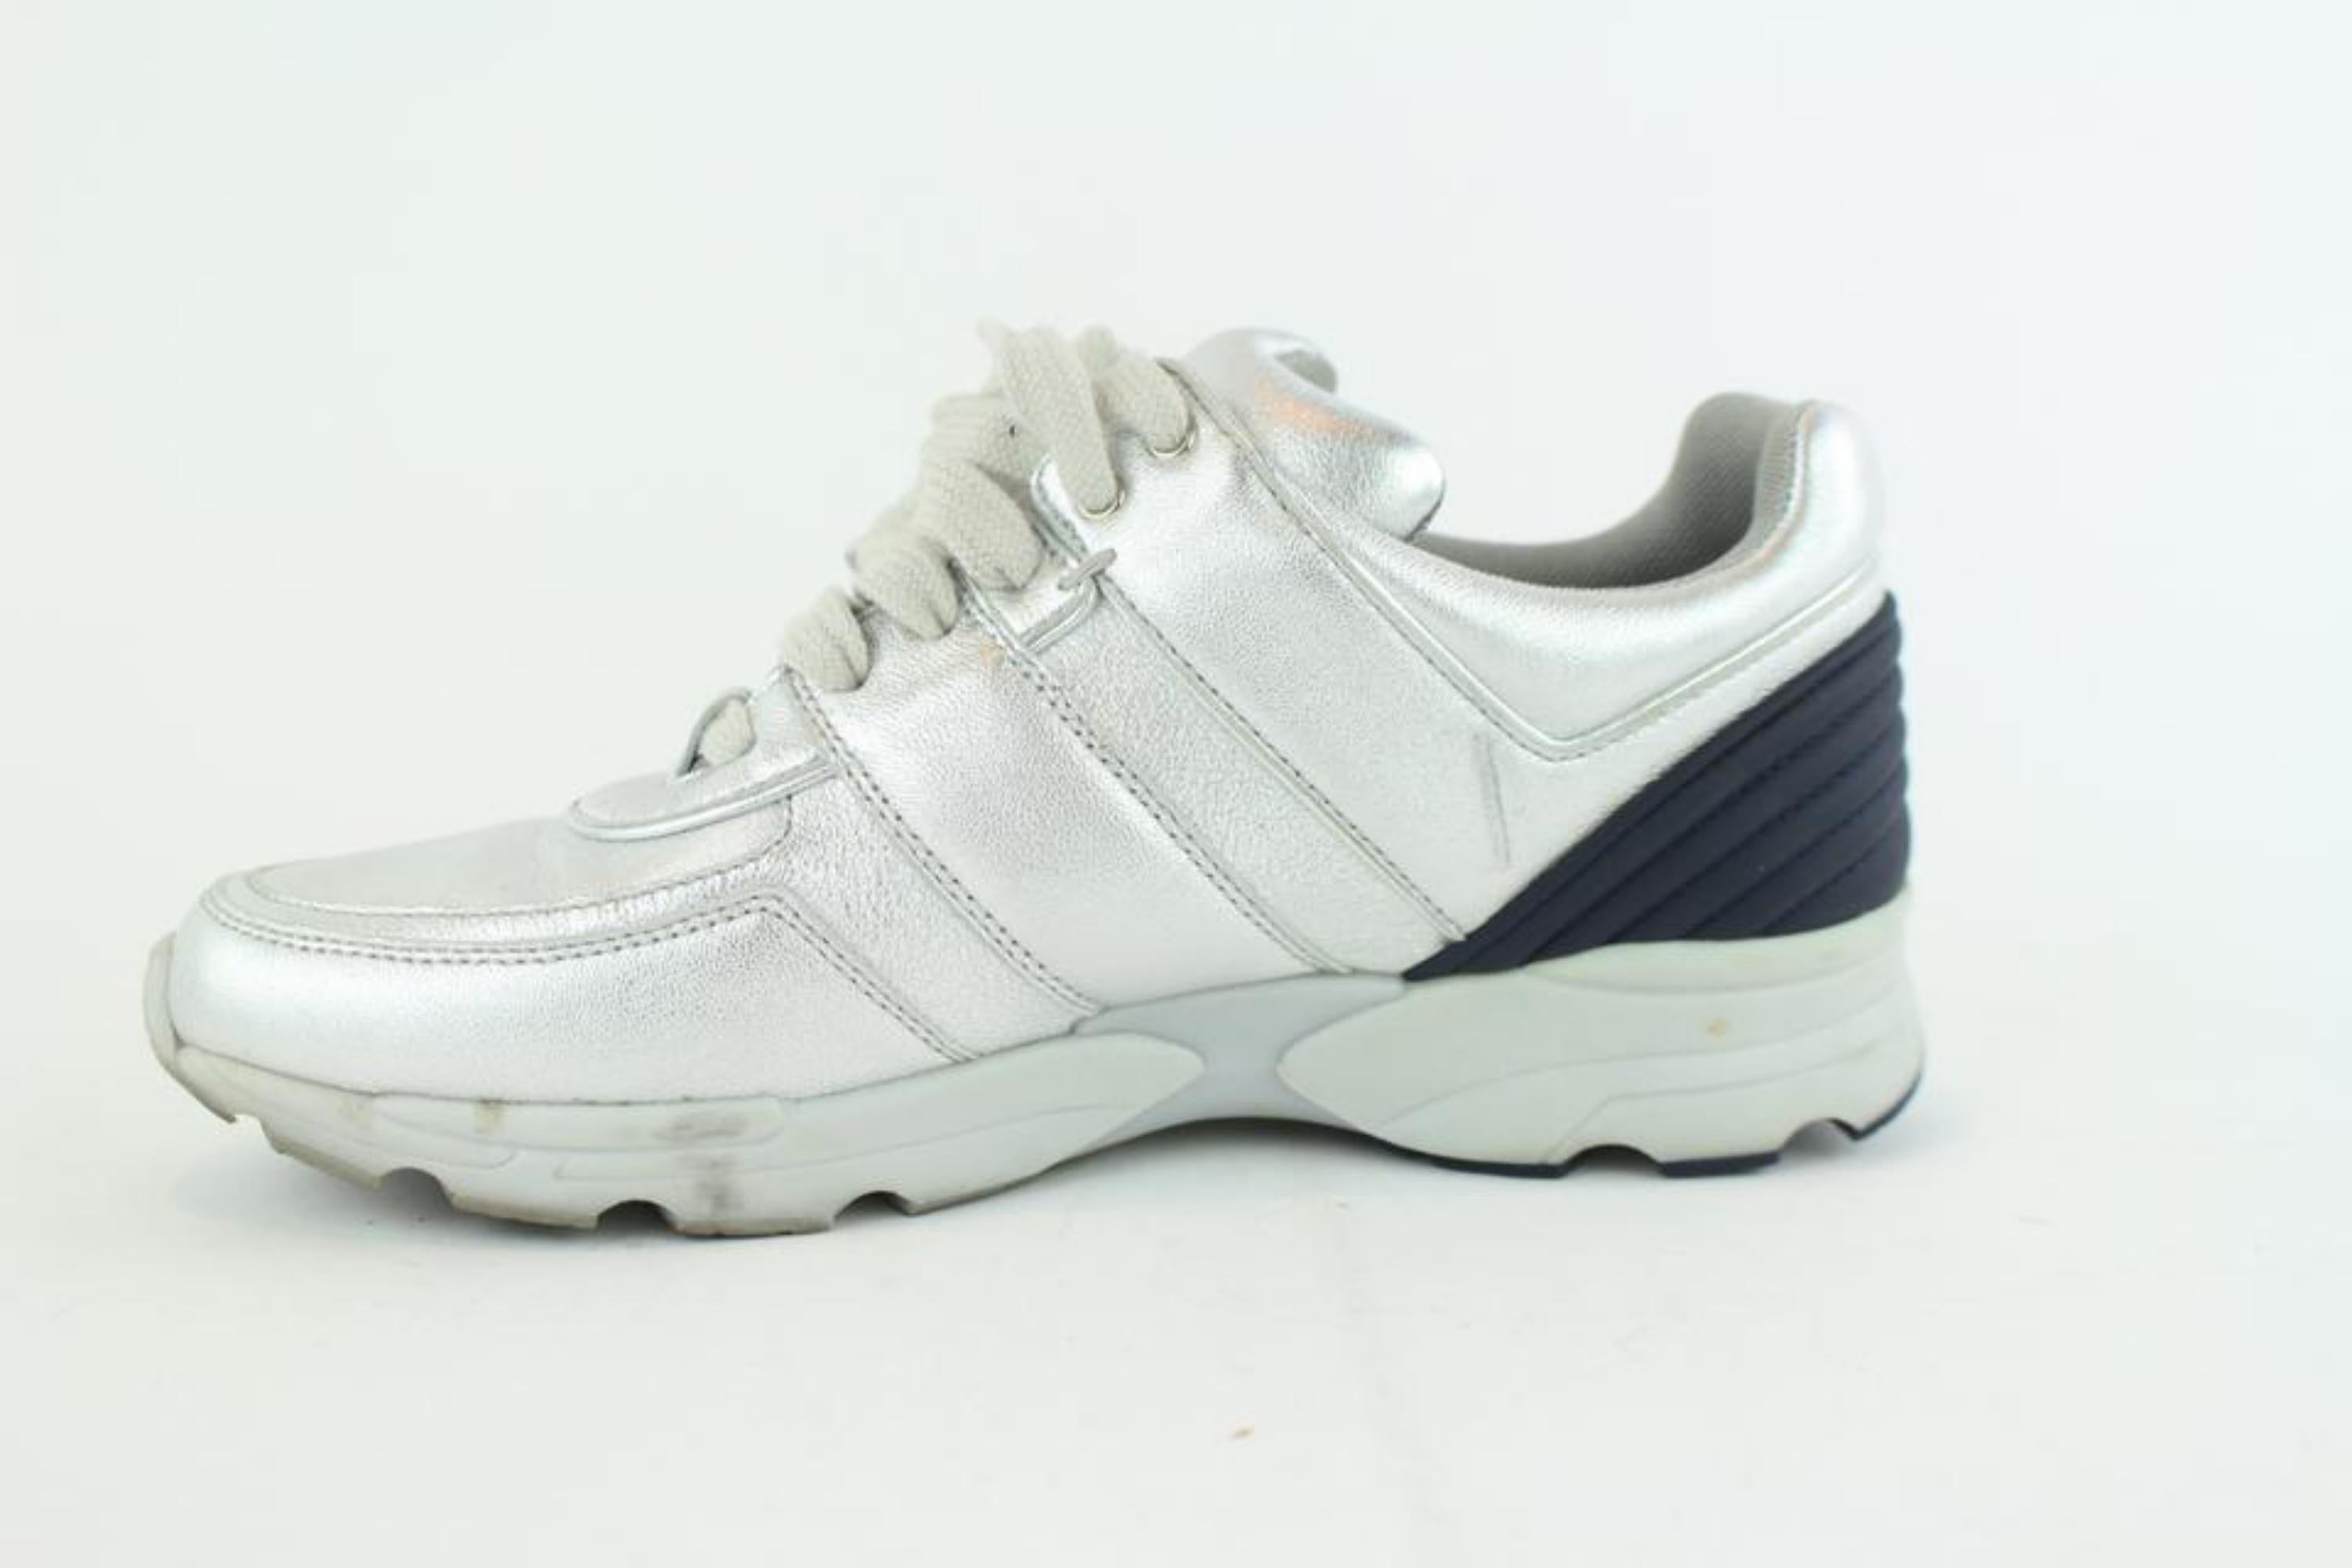 Chanel Silver 16s Metallic Bicolor Trainer 1cz1005 Sneakers For Sale 5